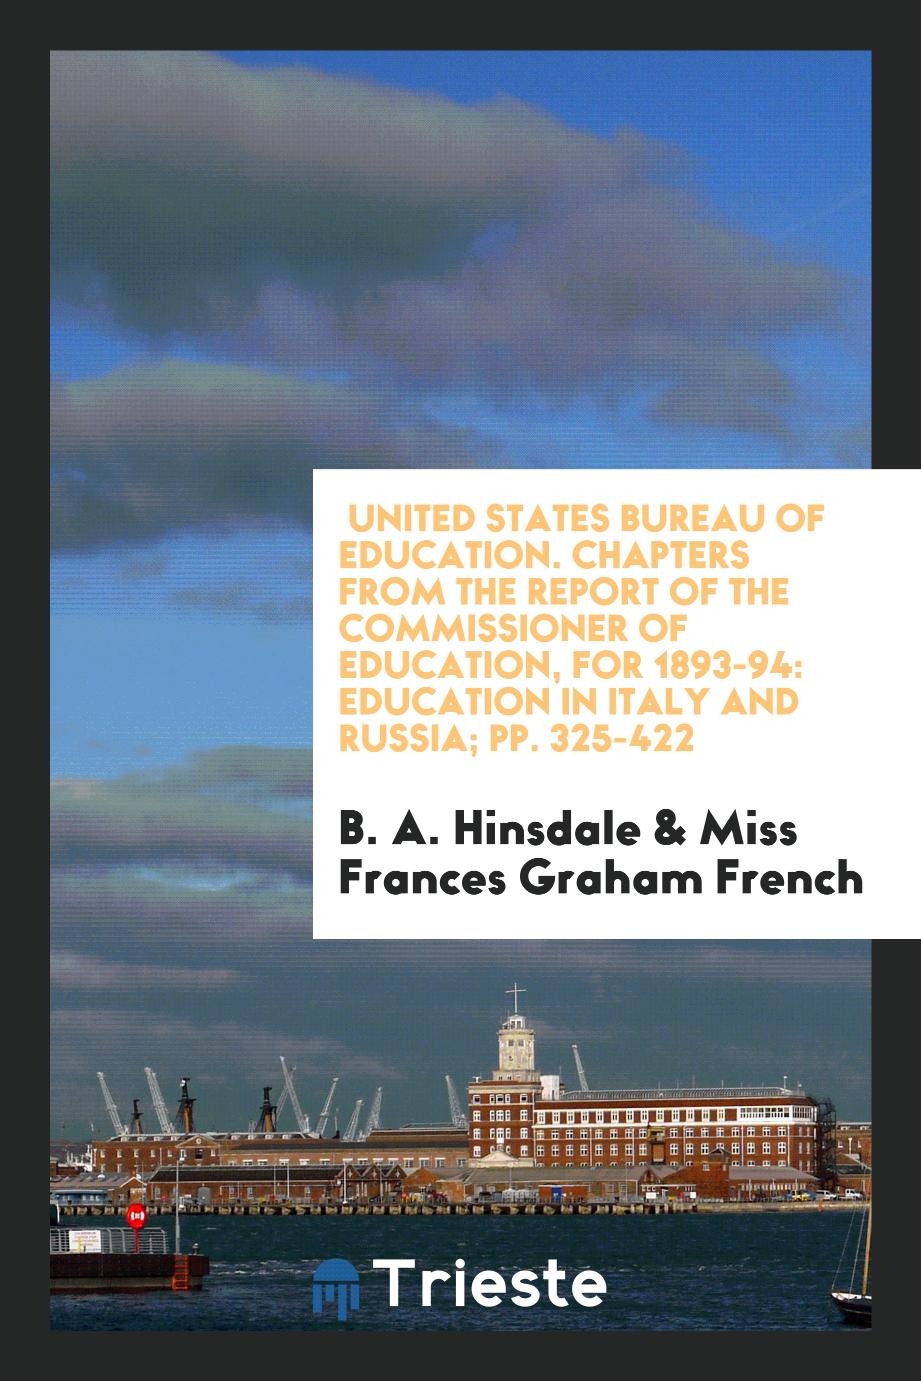 United States Bureau of Education. Chapters from the Report of the Commissioner of Education, for 1893-94: Education in Italy and Russia; pp. 325-422